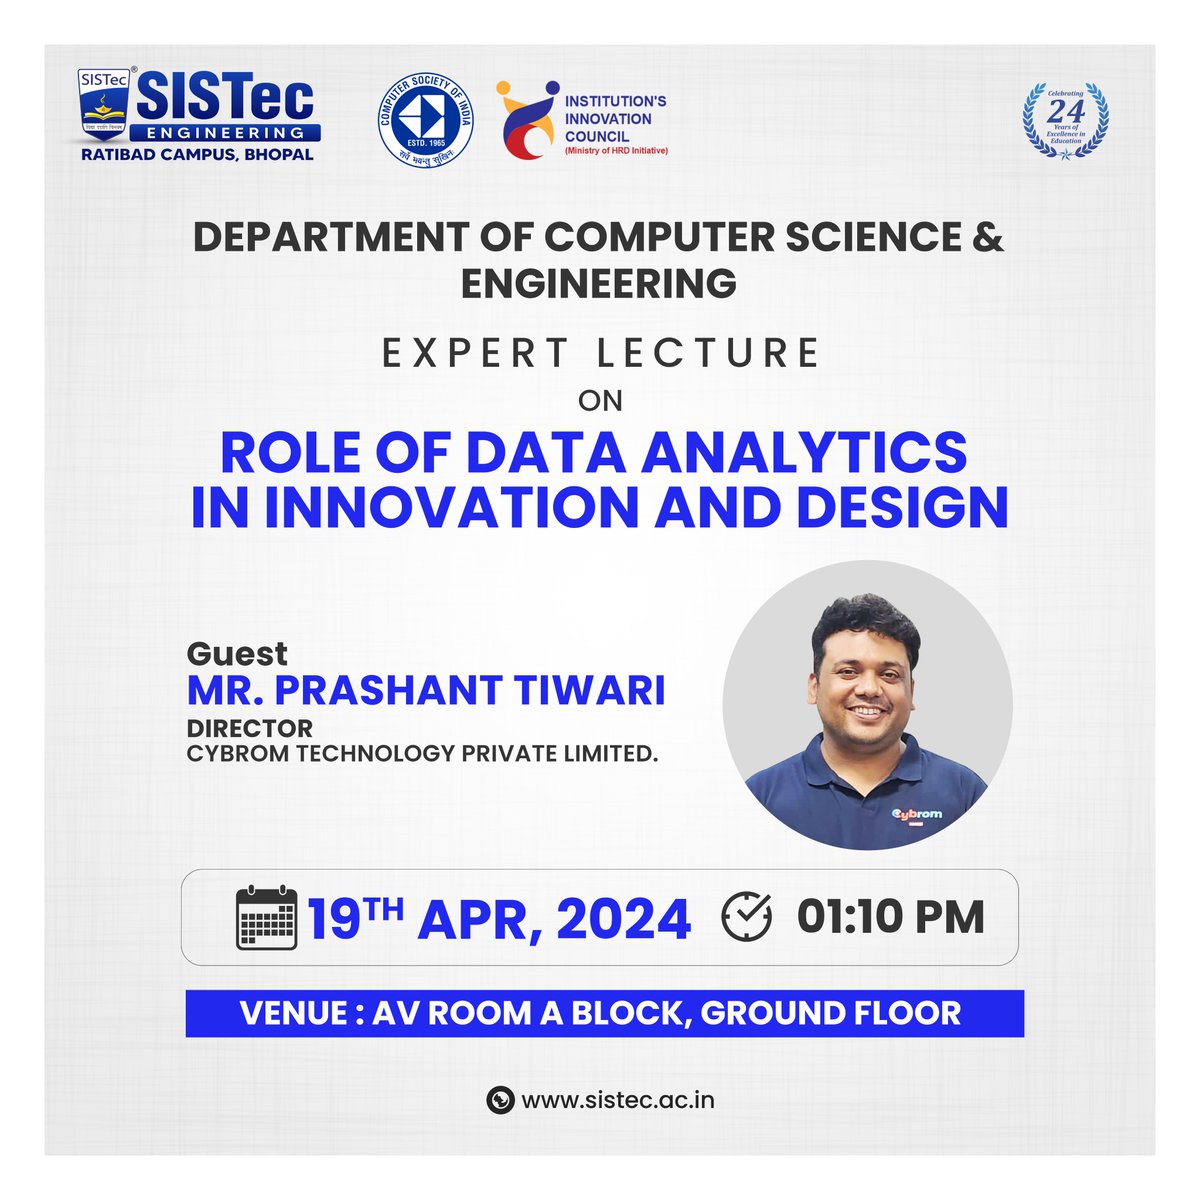 Dept. of CSE at SISTec Ratibad announces an expert lecture on 'The Role of Data Analytics in Innovation and Design' by Mr. Prashant Tiwari, Director, Cybrom Technology. Date: April 19, 2024. #DataAnalytics #Innovation #Design #Lecture #SIStEC #GuestSpeaker